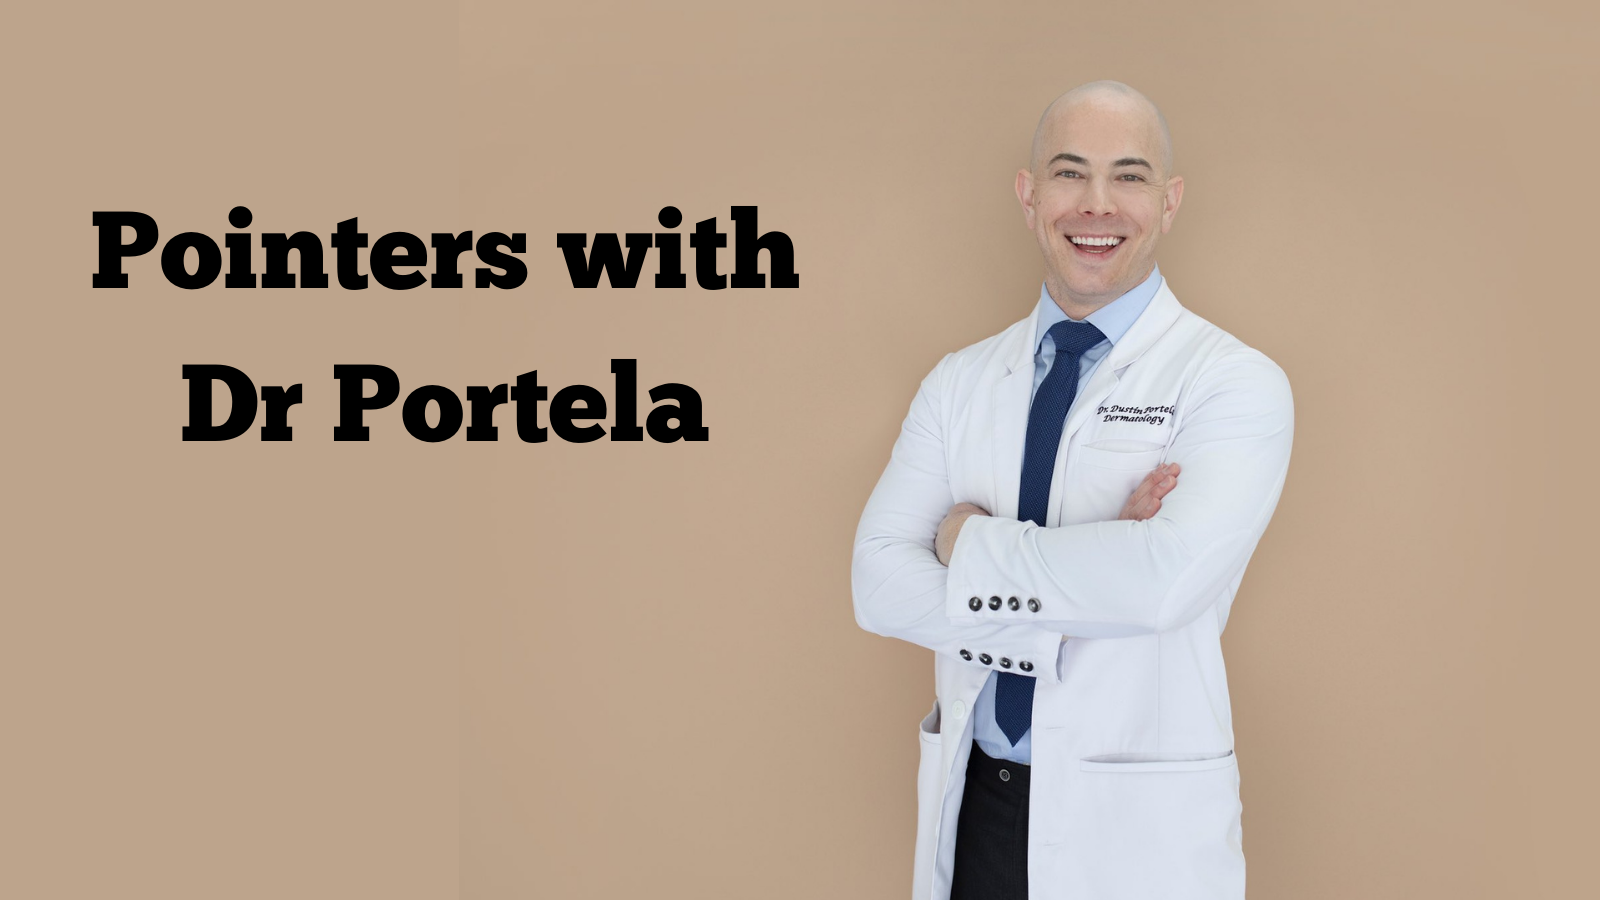 Pointers With Portela: Skin Conditions with PCOS